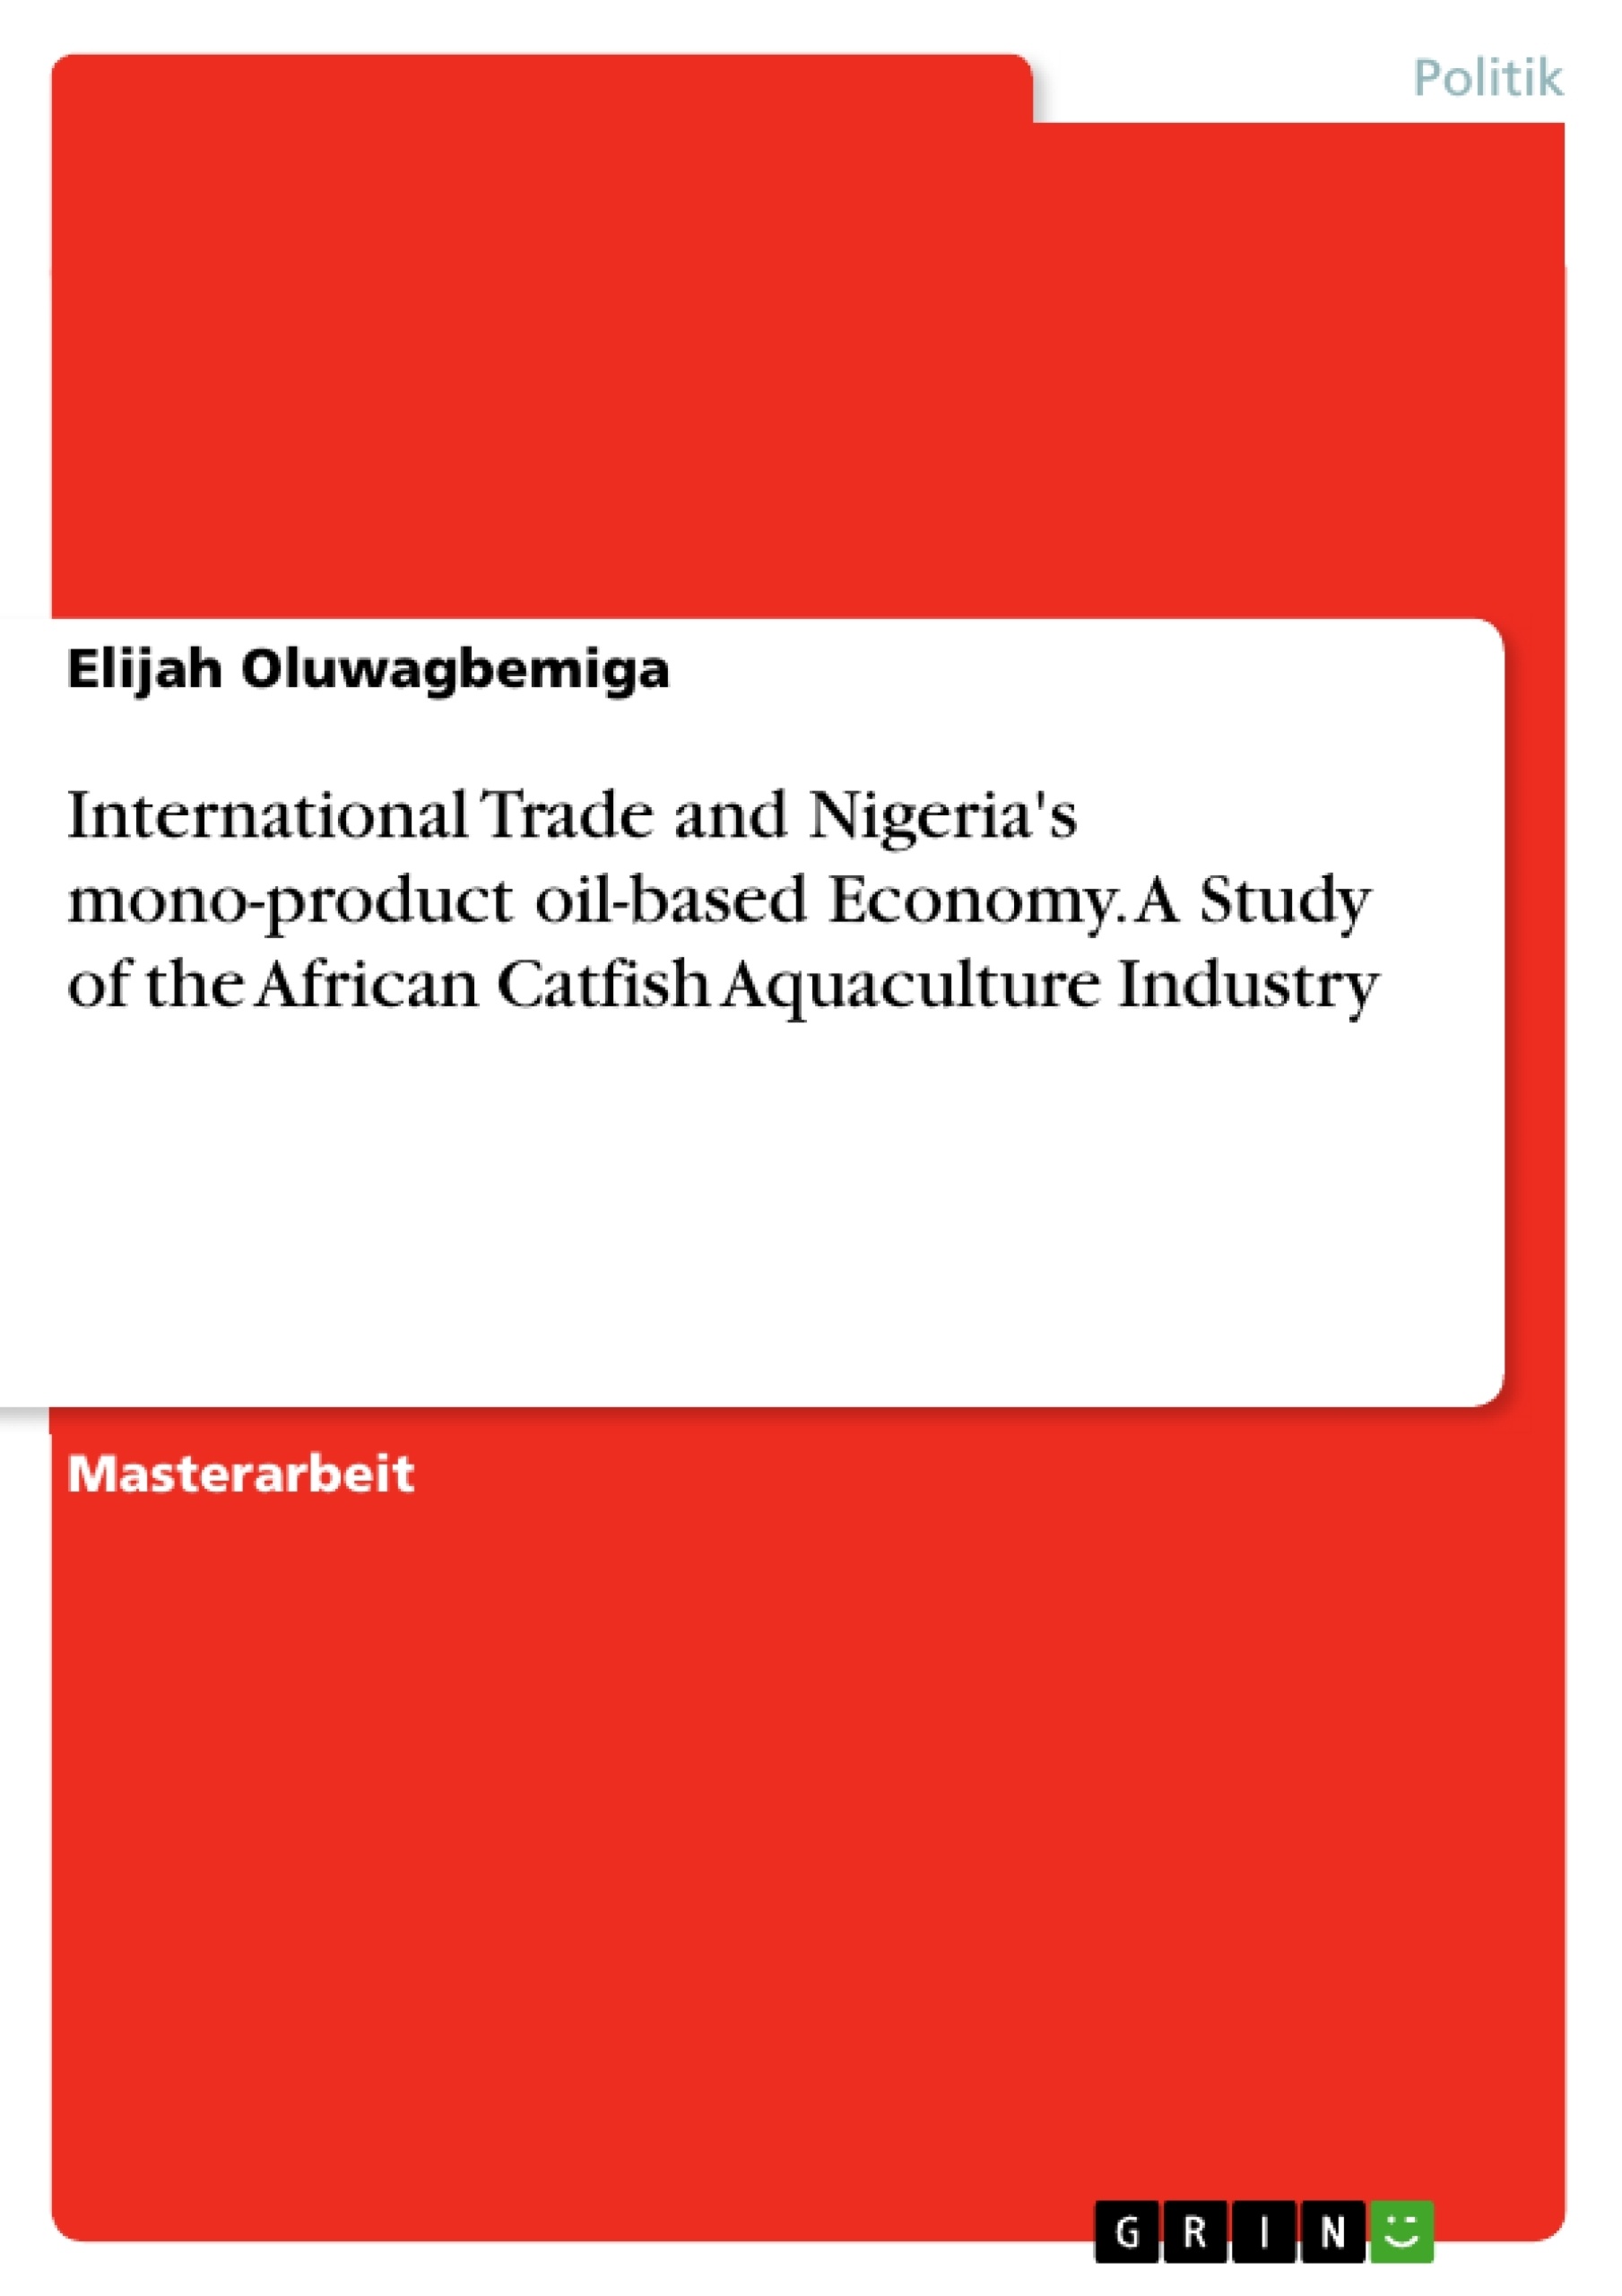 Grin International Trade And Nigeria S Mono Product Oil Based Economy A Study Of The African Catfish Aquaculture Industry - 